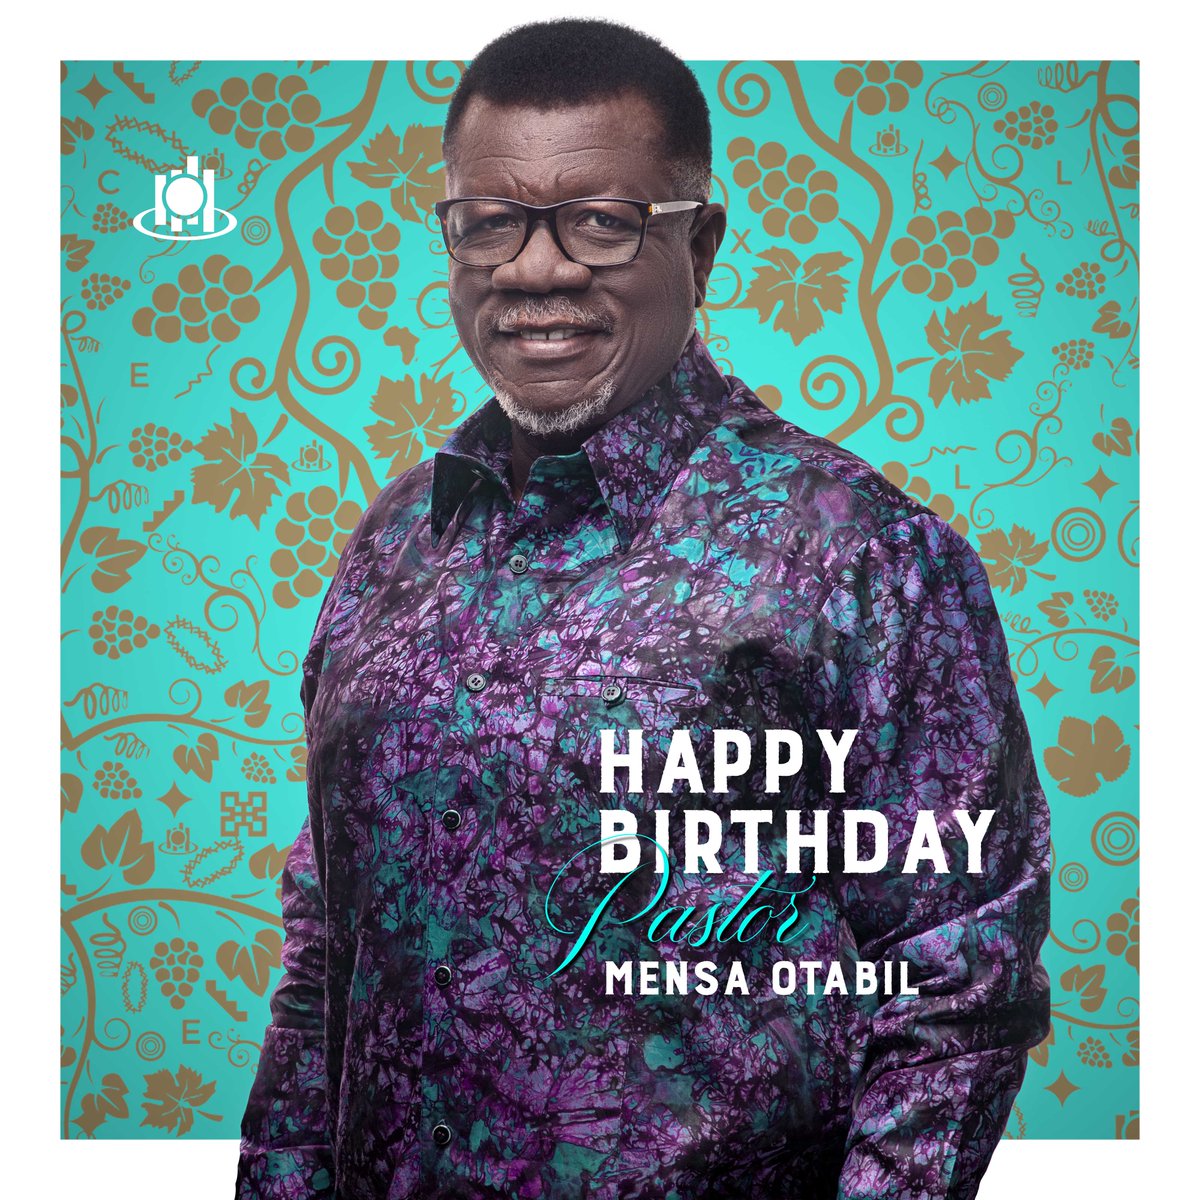 With a grateful heart, we wish you GREAT INCREASE in the many years ahead. Hip... Hip... Hip 🥳🥳🥳🥳
#DrMensaOtabil
#YearOfIncrease
#WeAreICGC